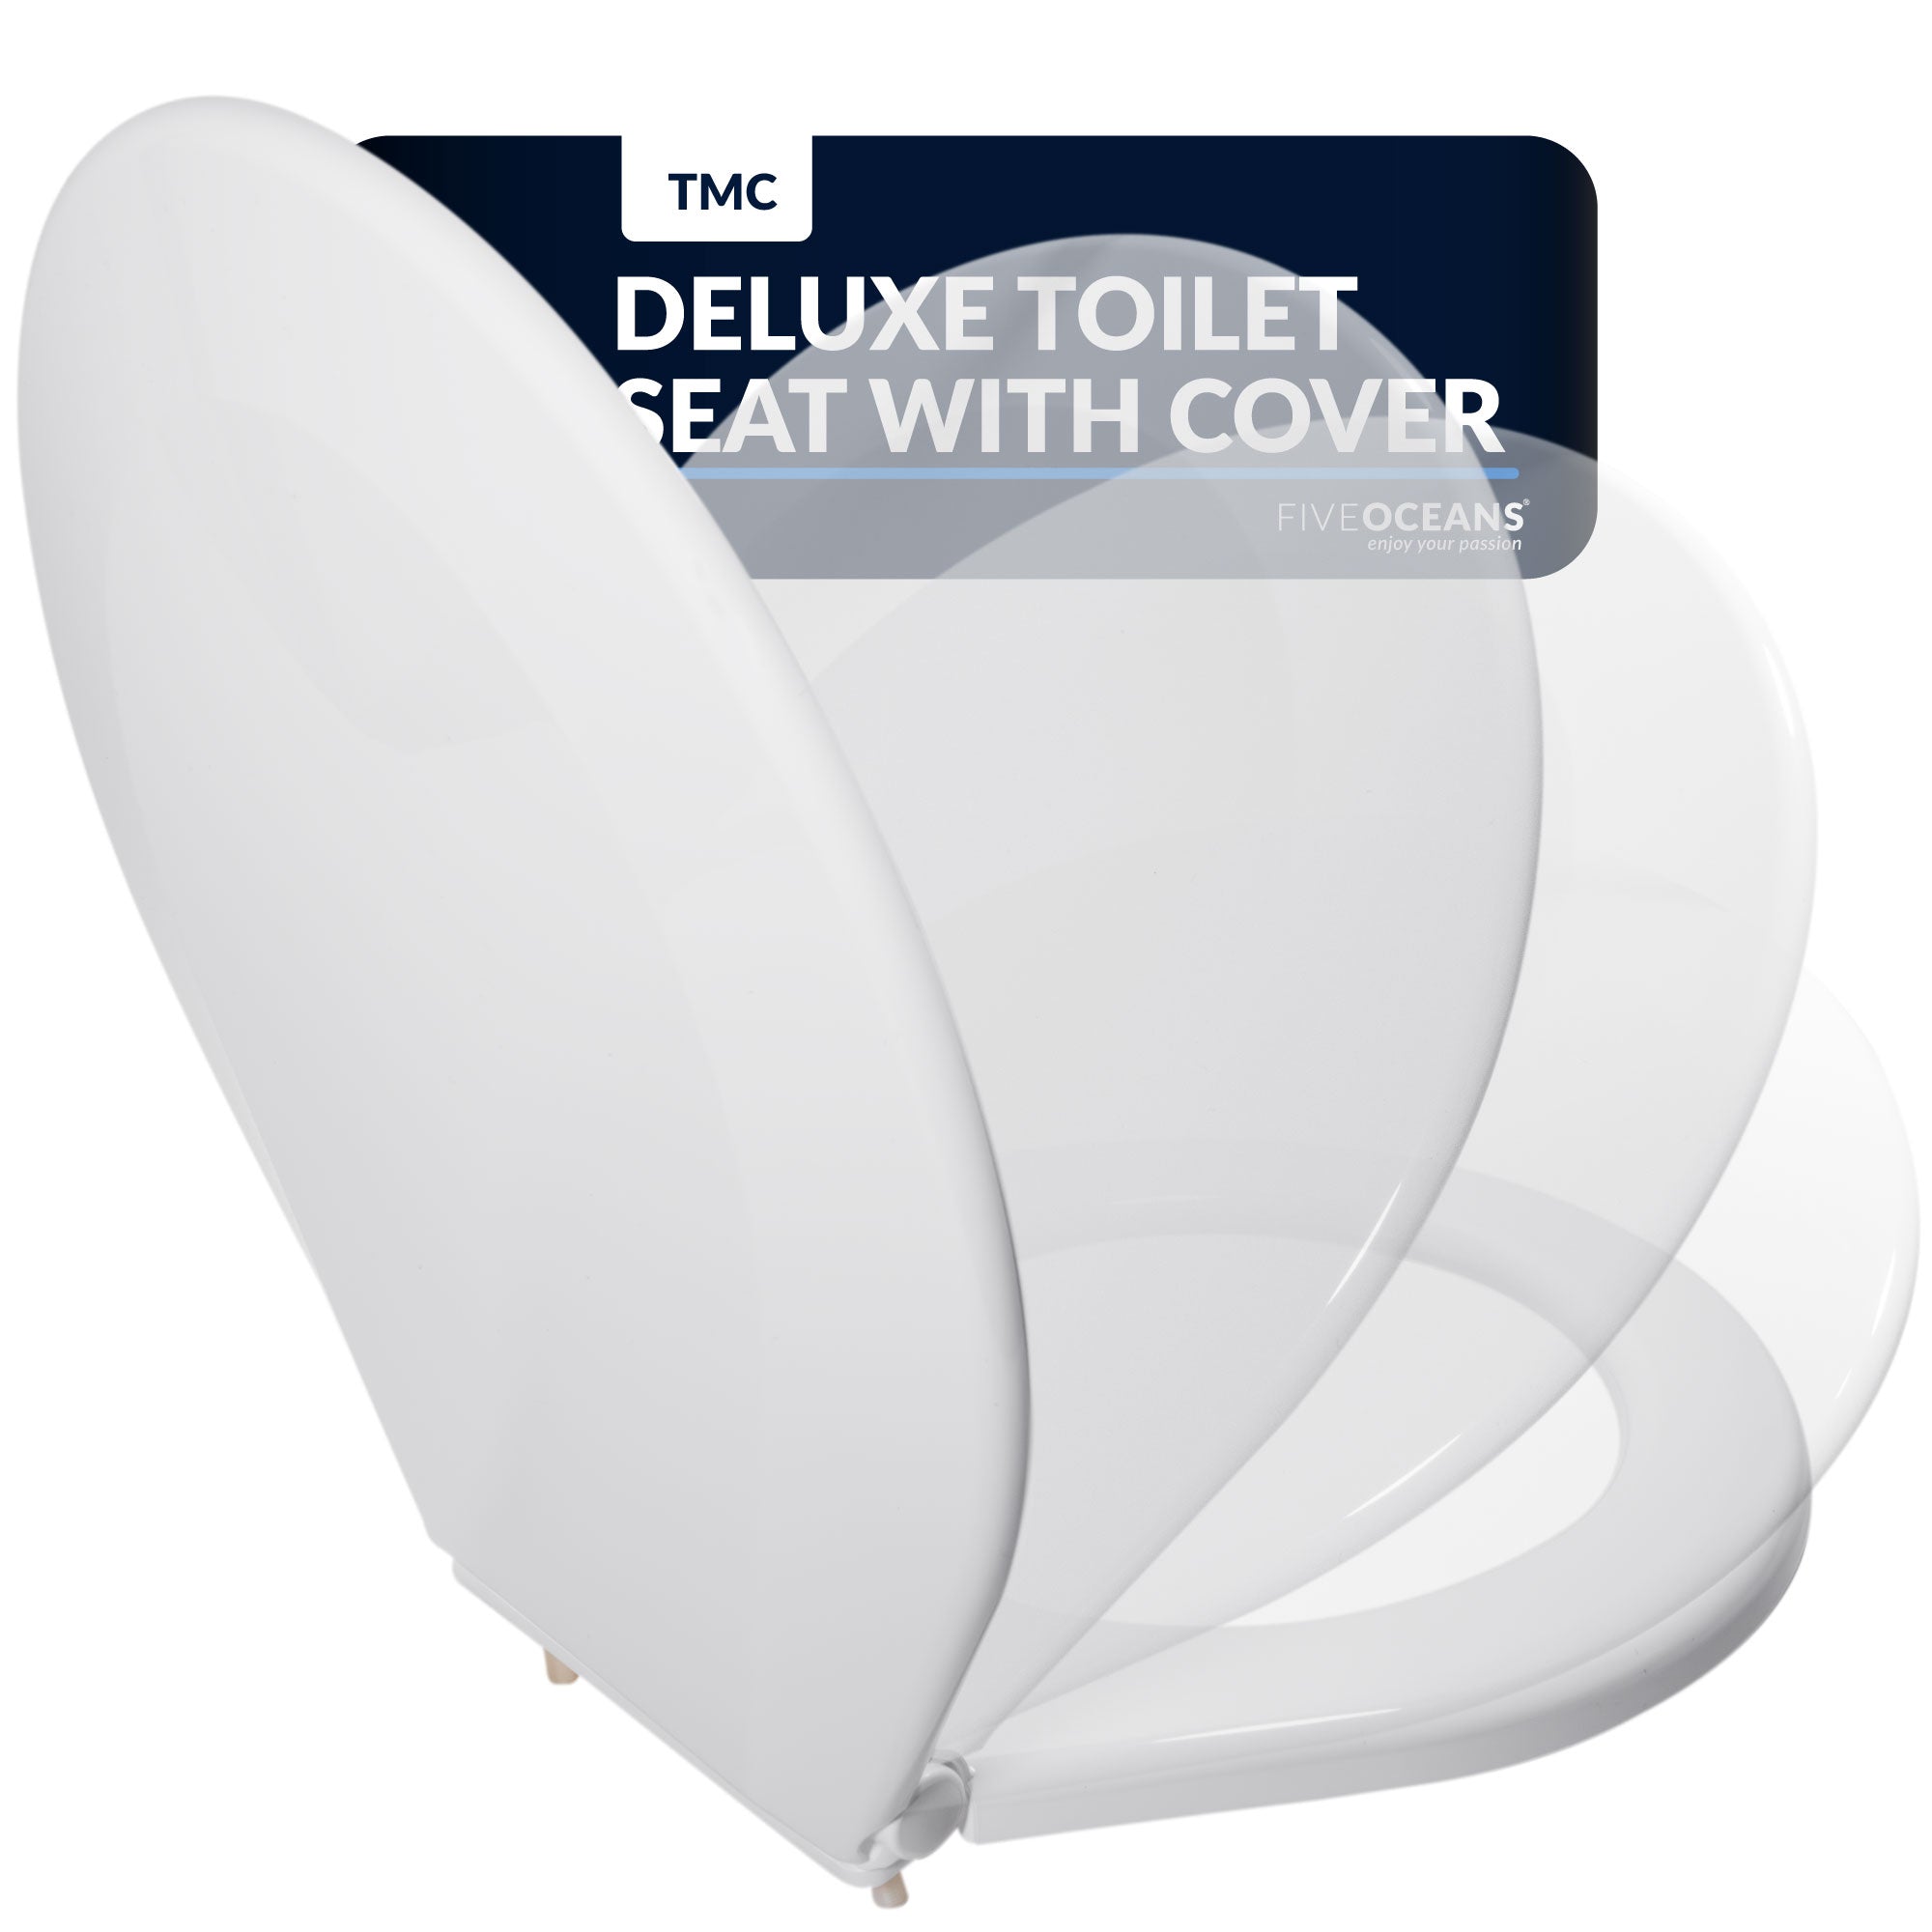 TMC Deluxe Toilet Seat with Cover - FO4485